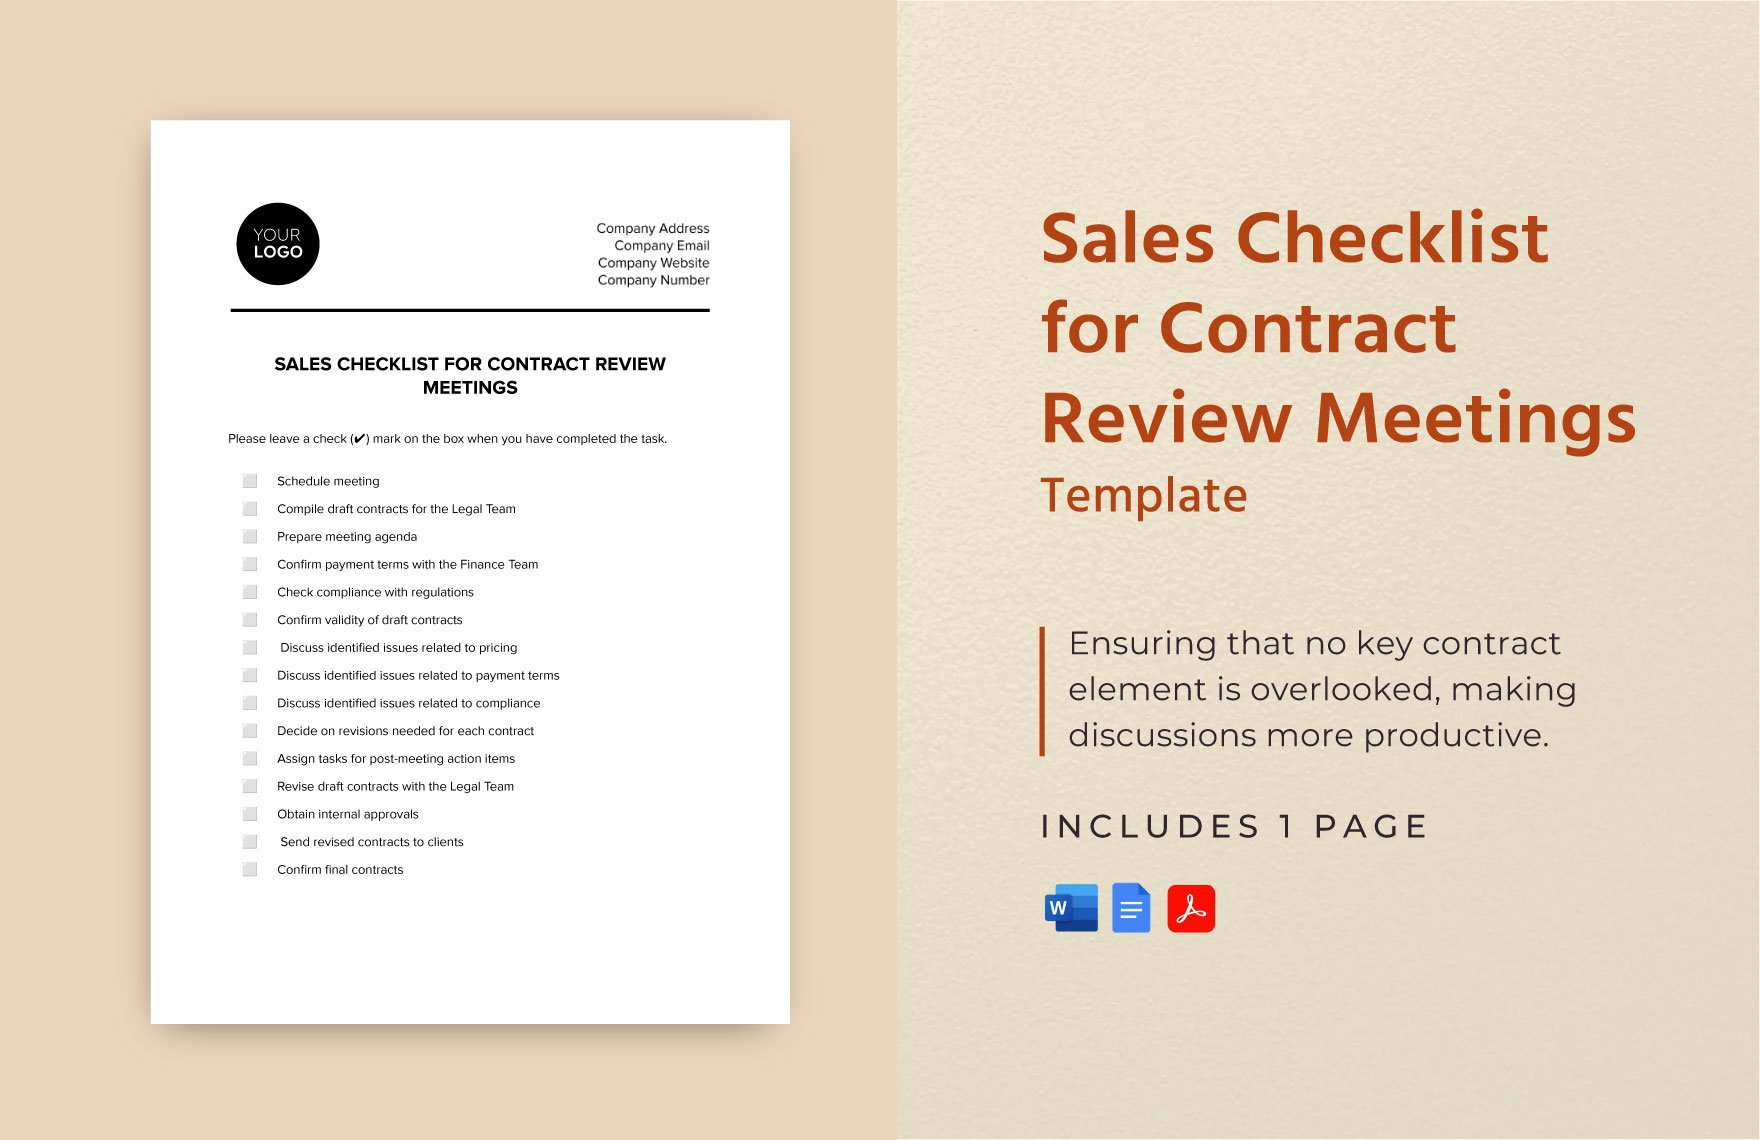 Sales Checklist for Contract Review Meetings Template in Word, Google Docs, PDF